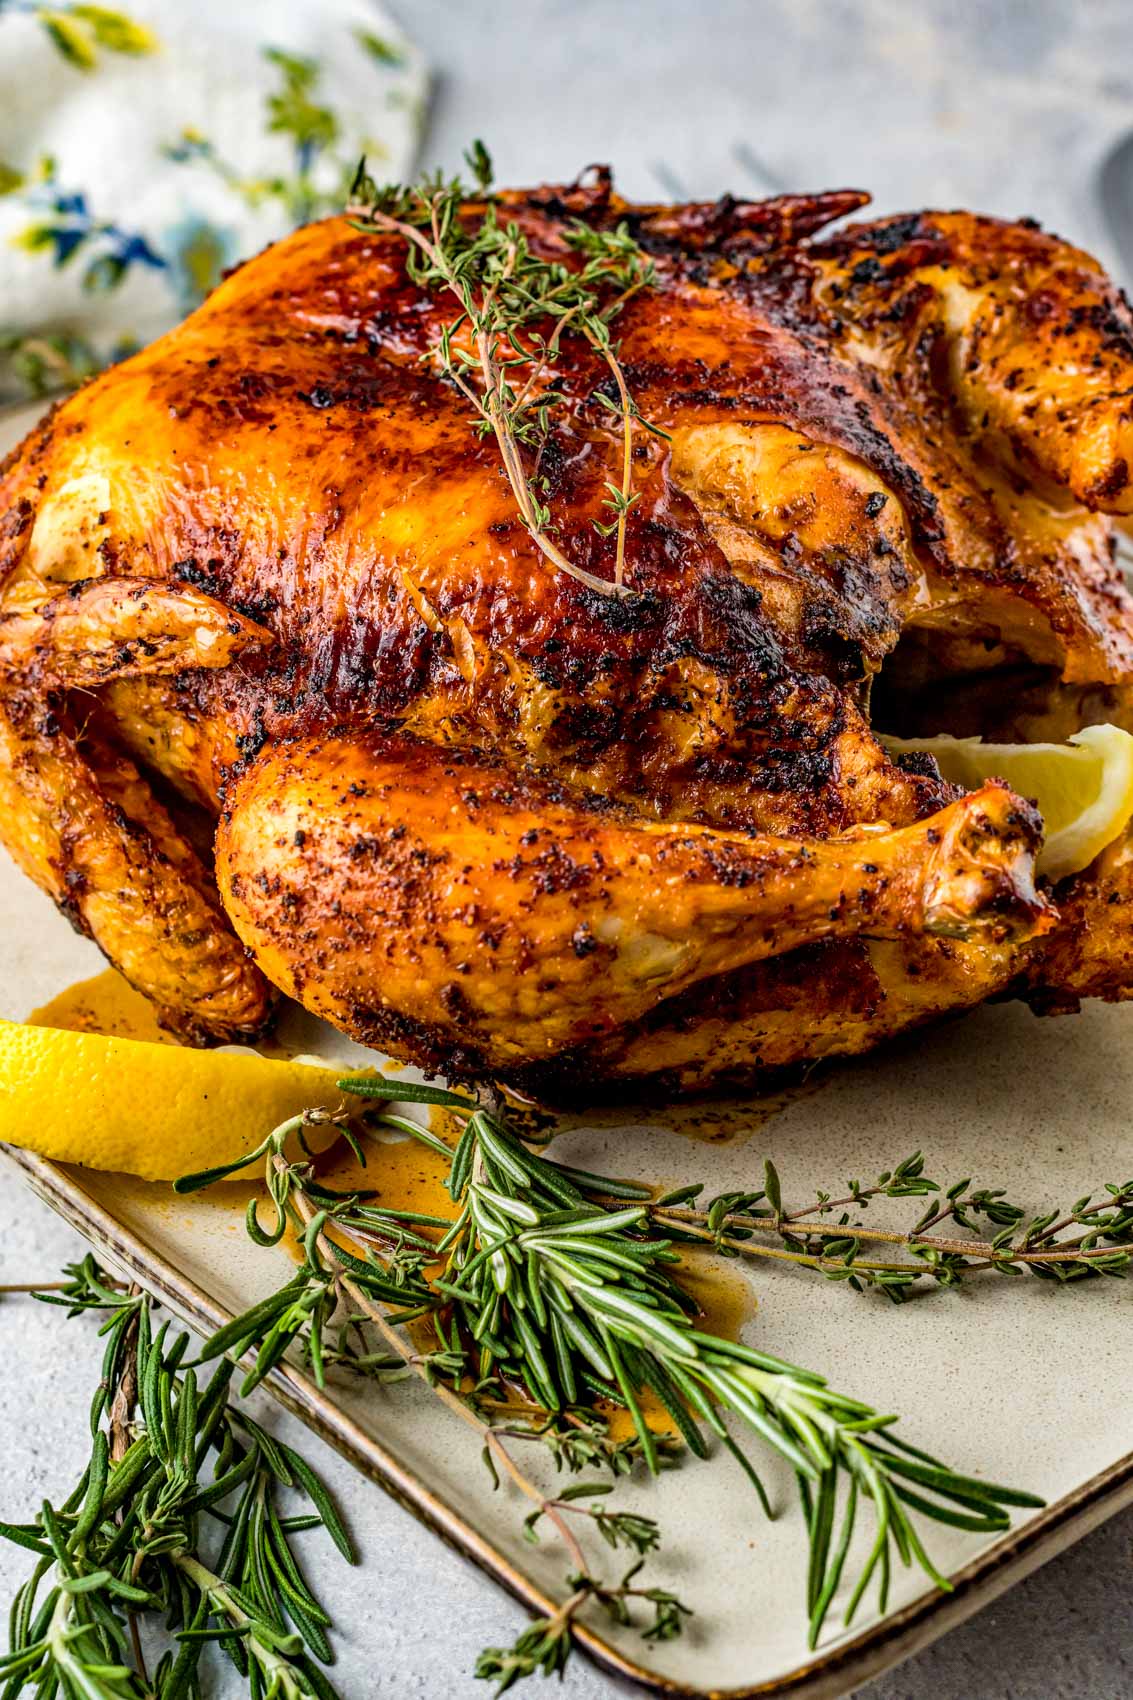 rotisserie style chicken on a platter with lemon wedges, rosemary and thyme seasoning blend